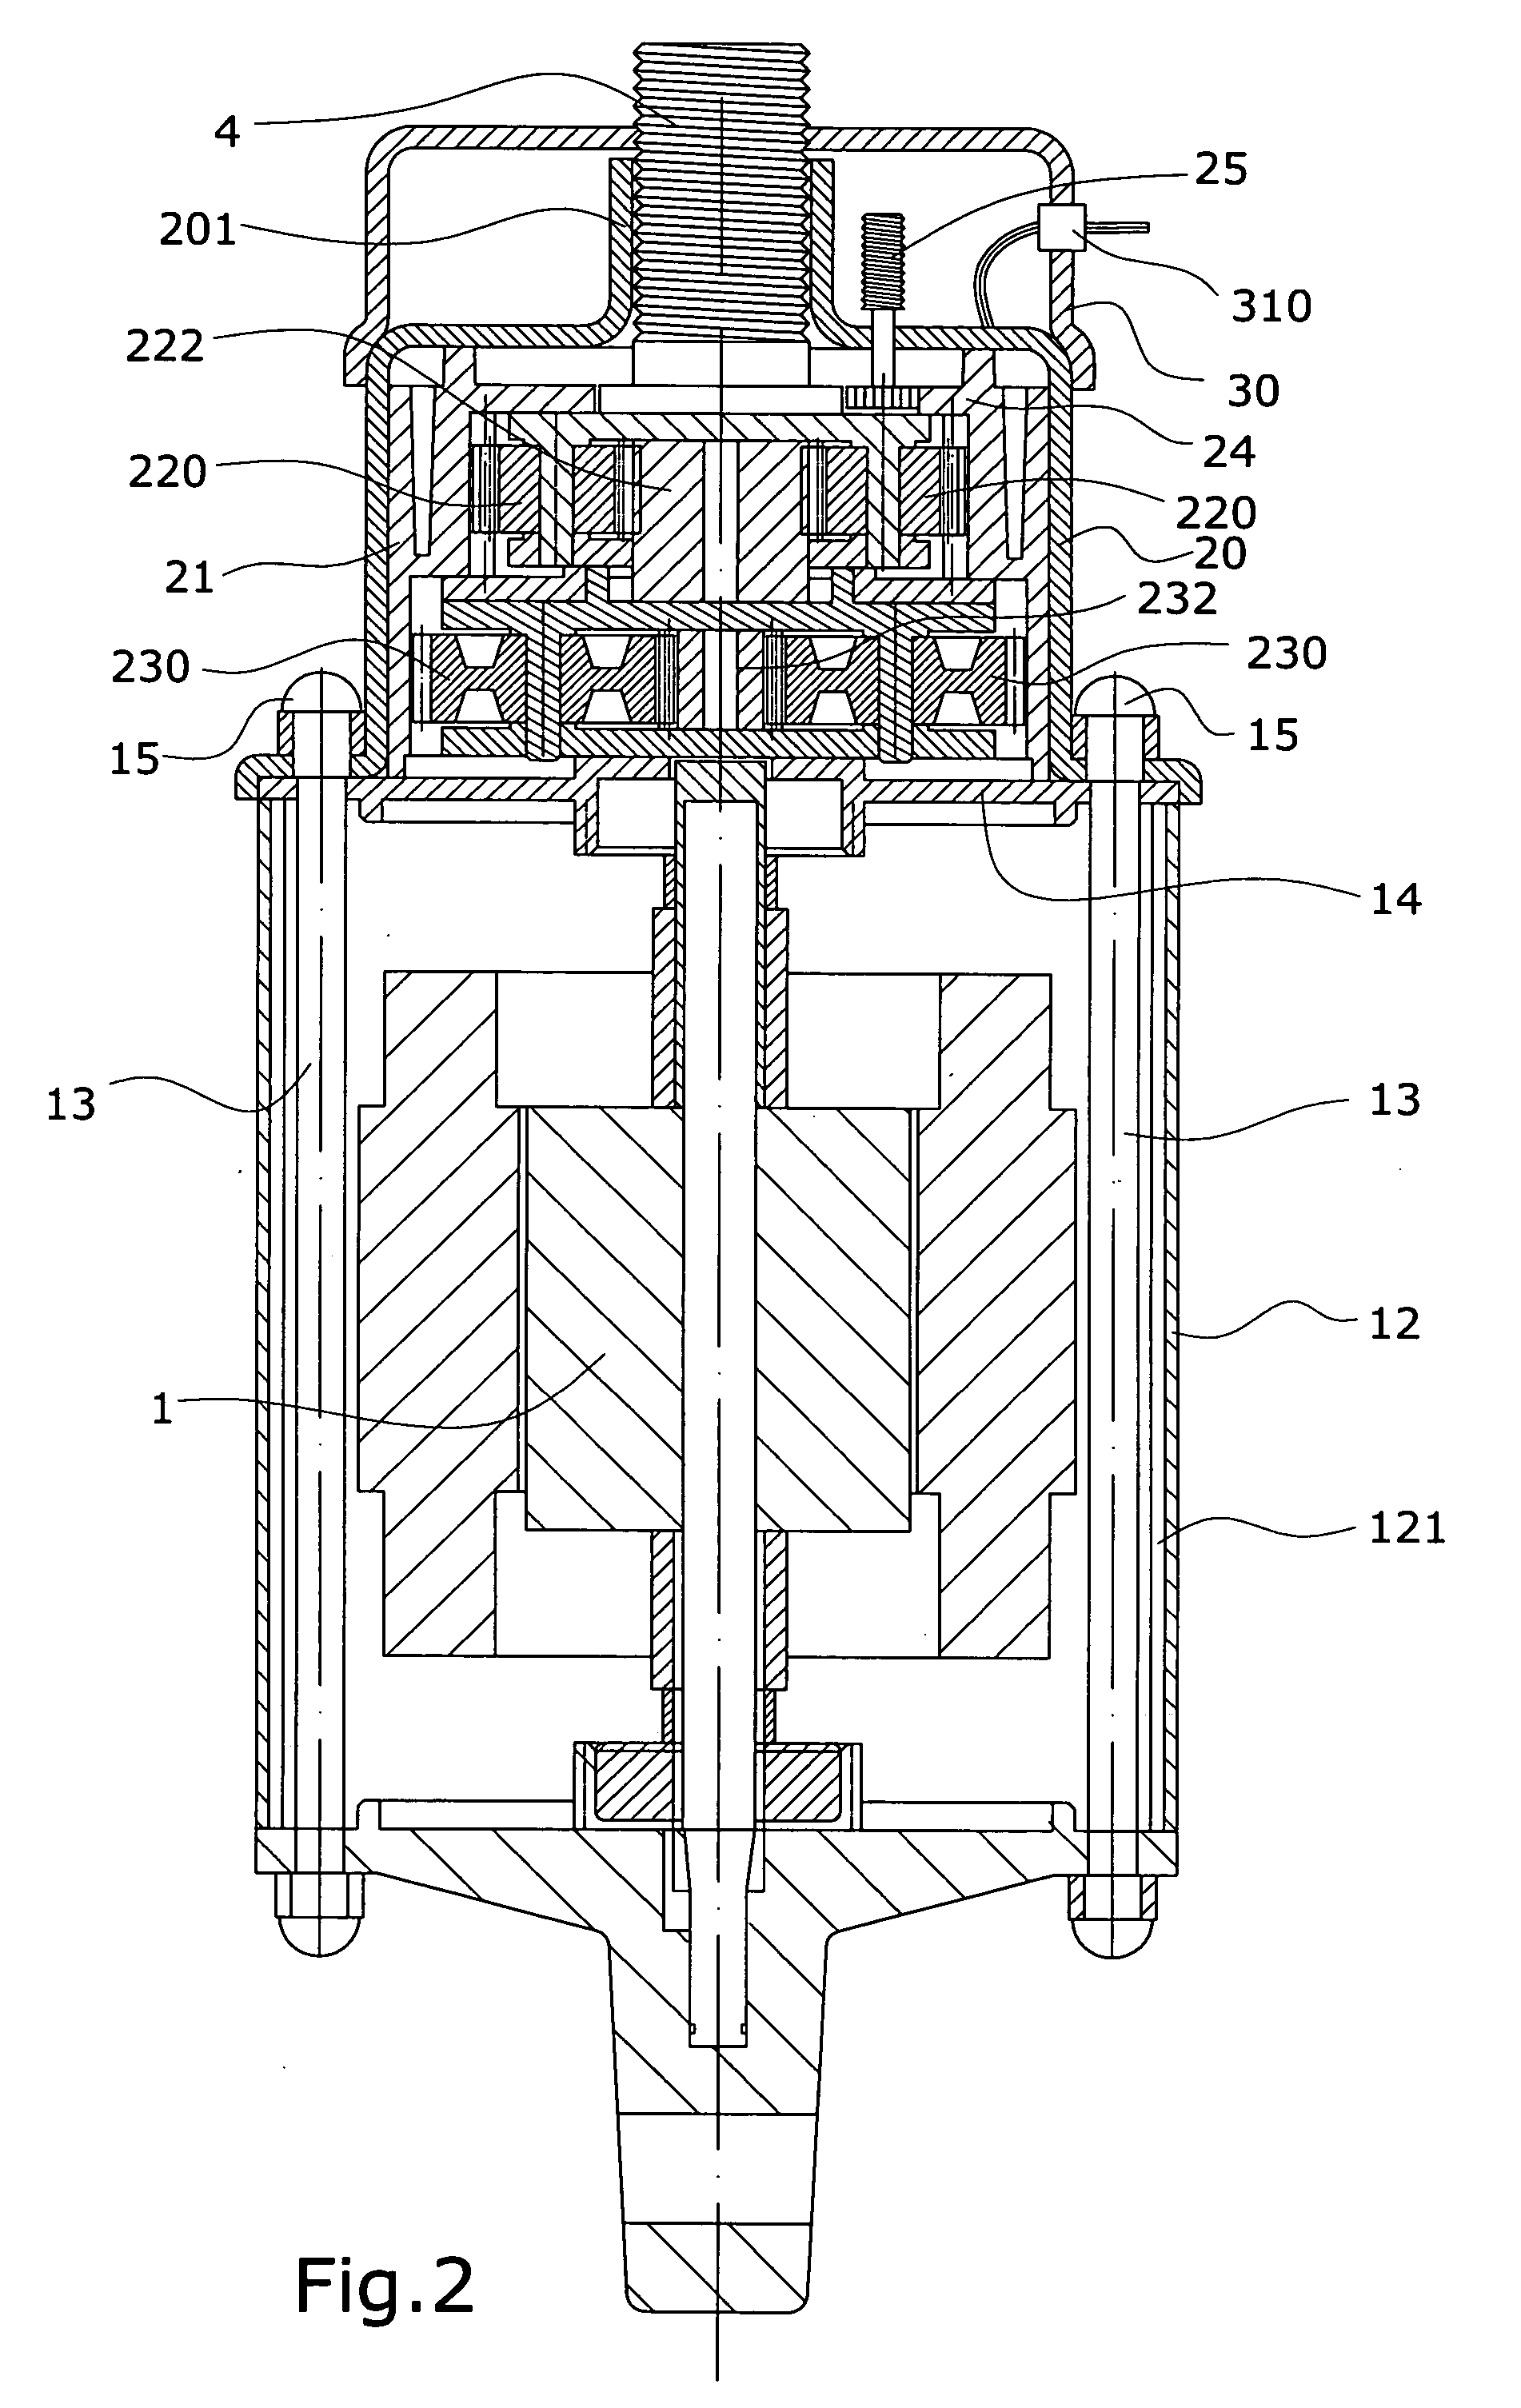 Device of an improvement on the structure of linear actuator